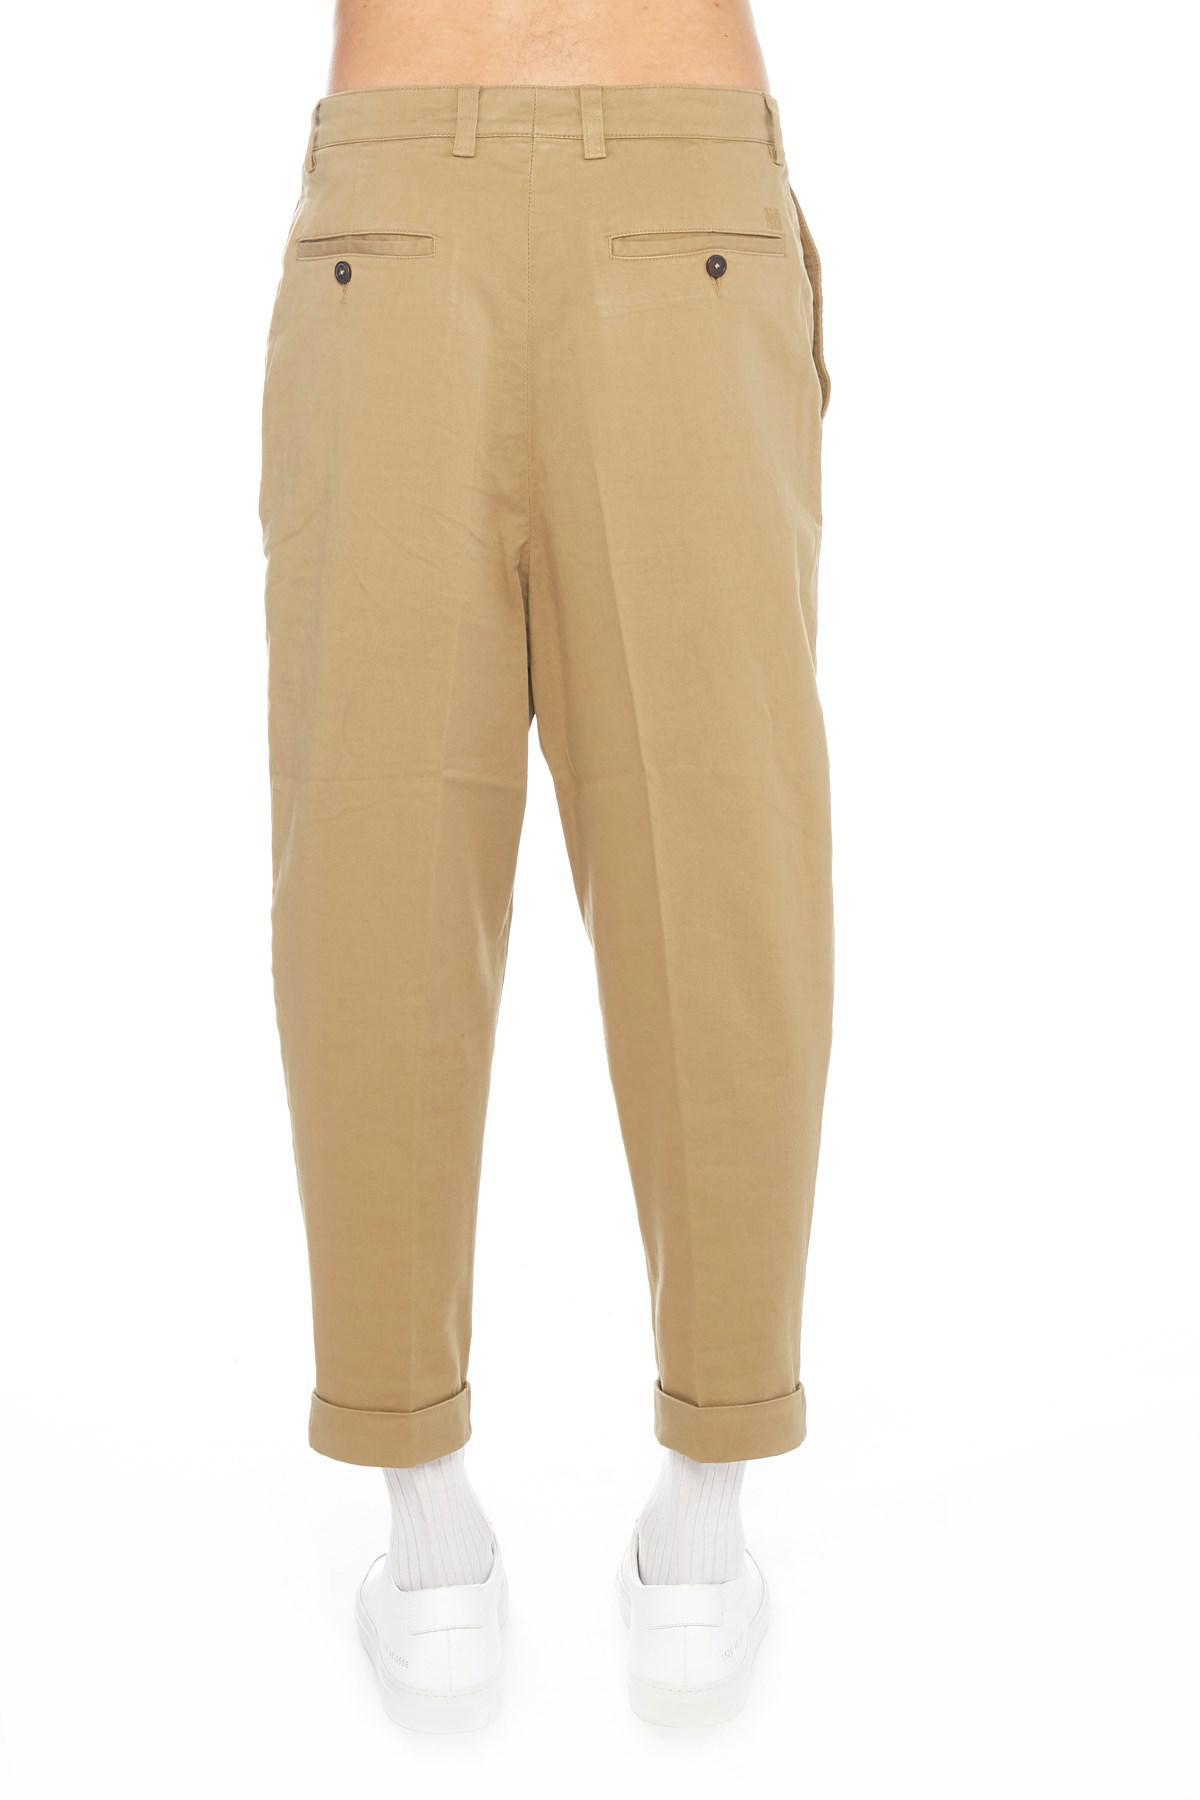 Lyst - AMI Carrot Fit Pants in Natural for Men